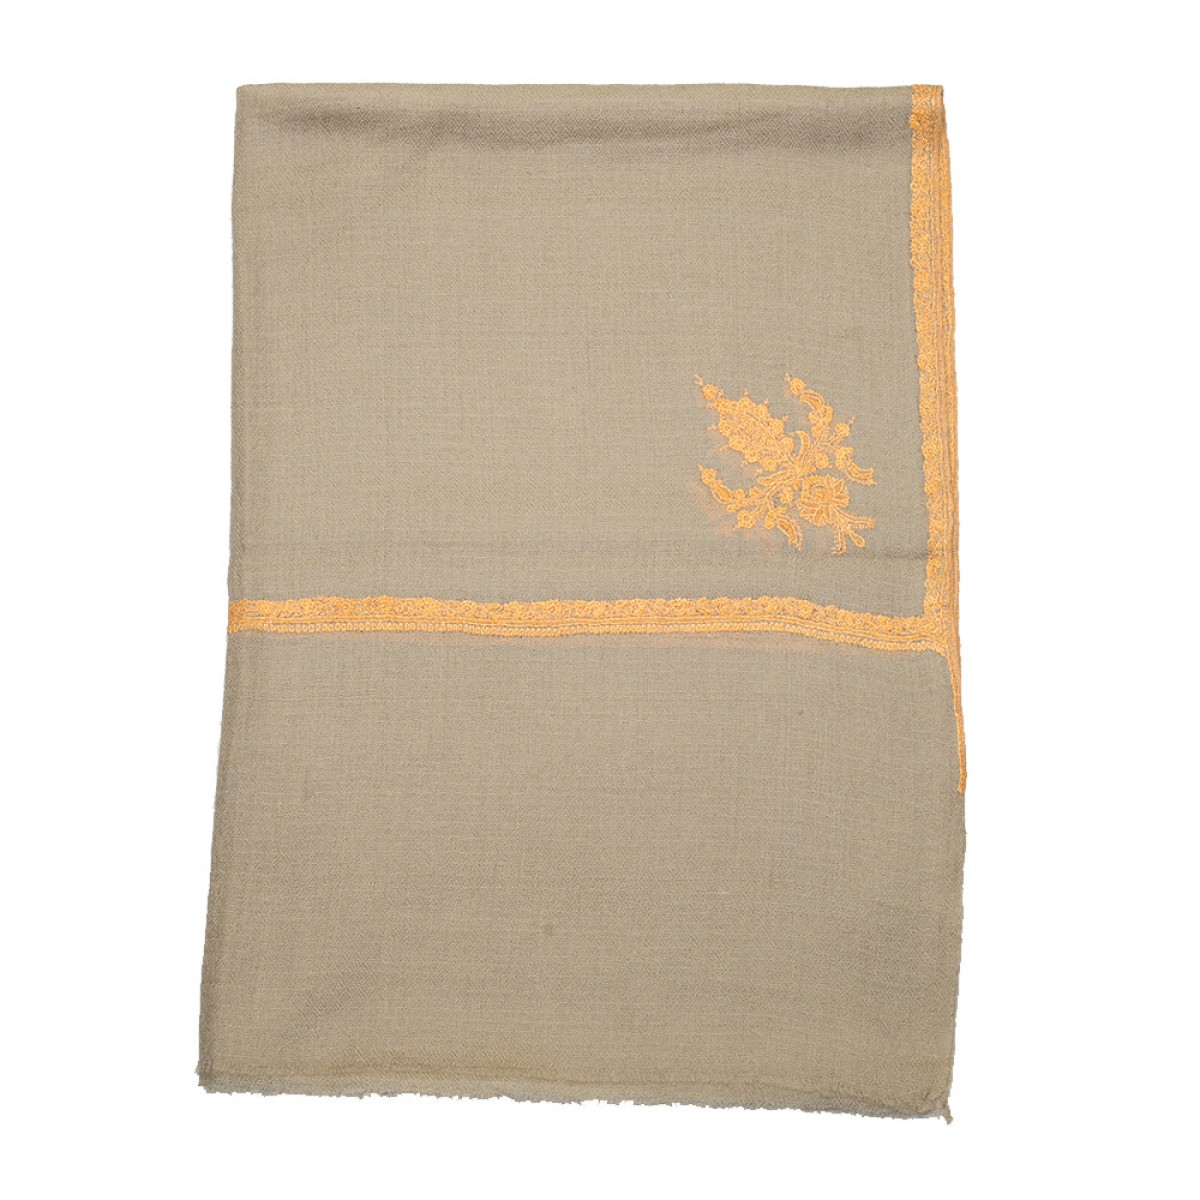 Embroidered Pashmina stole - Natural & Yellow